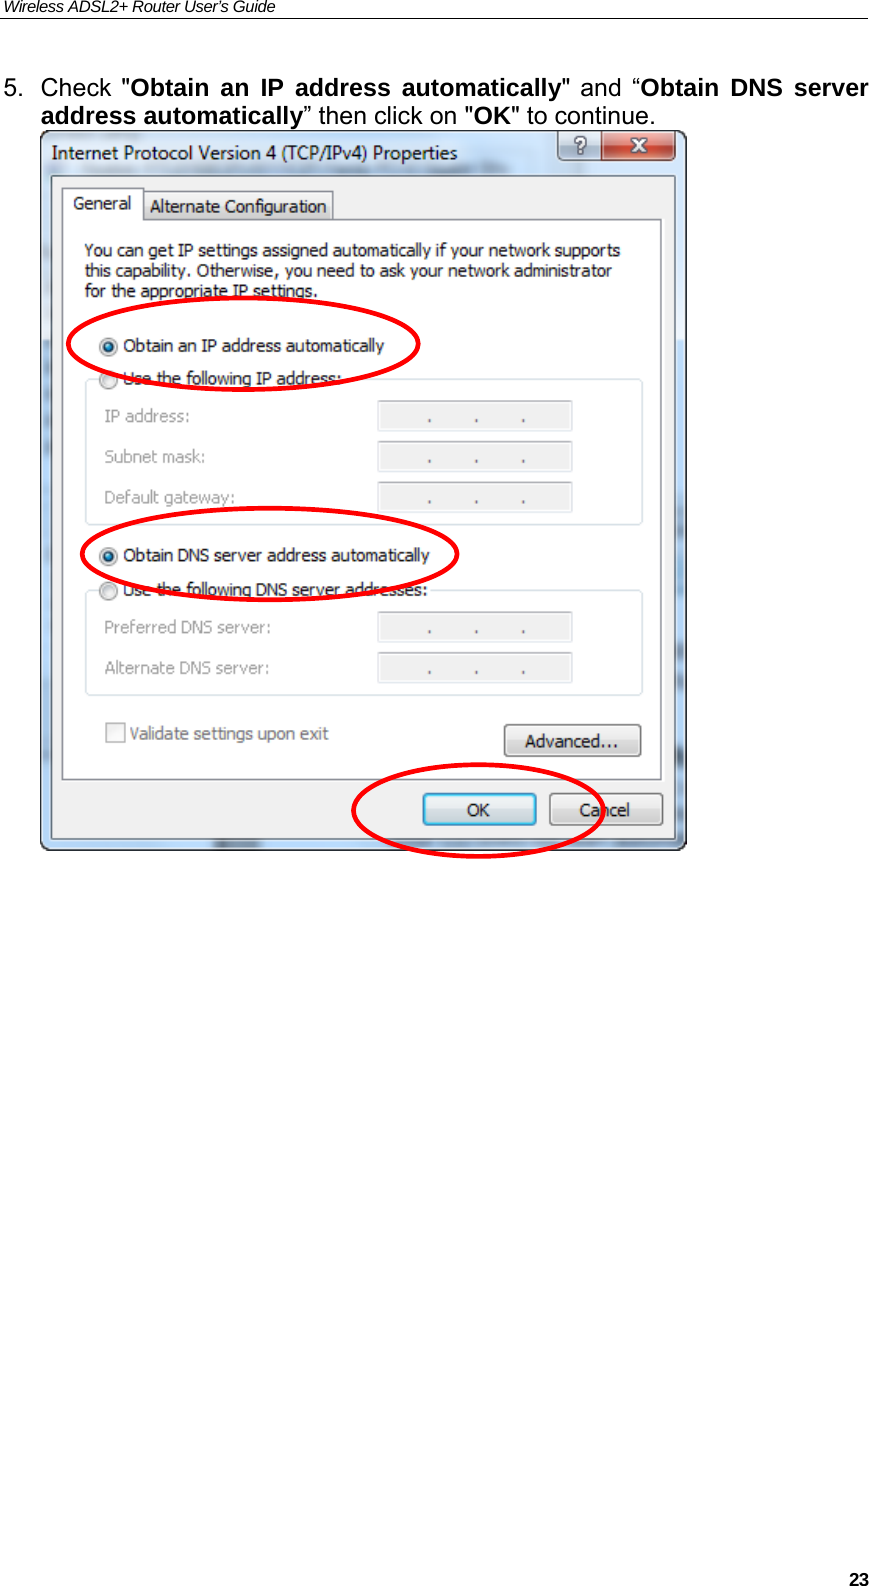 Wireless ADSL2+ Router User’s Guide     235. Check &quot;Obtain an IP address automatically&quot; and “Obtain DNS server address automatically” then click on &quot;OK&quot; to continue.                     